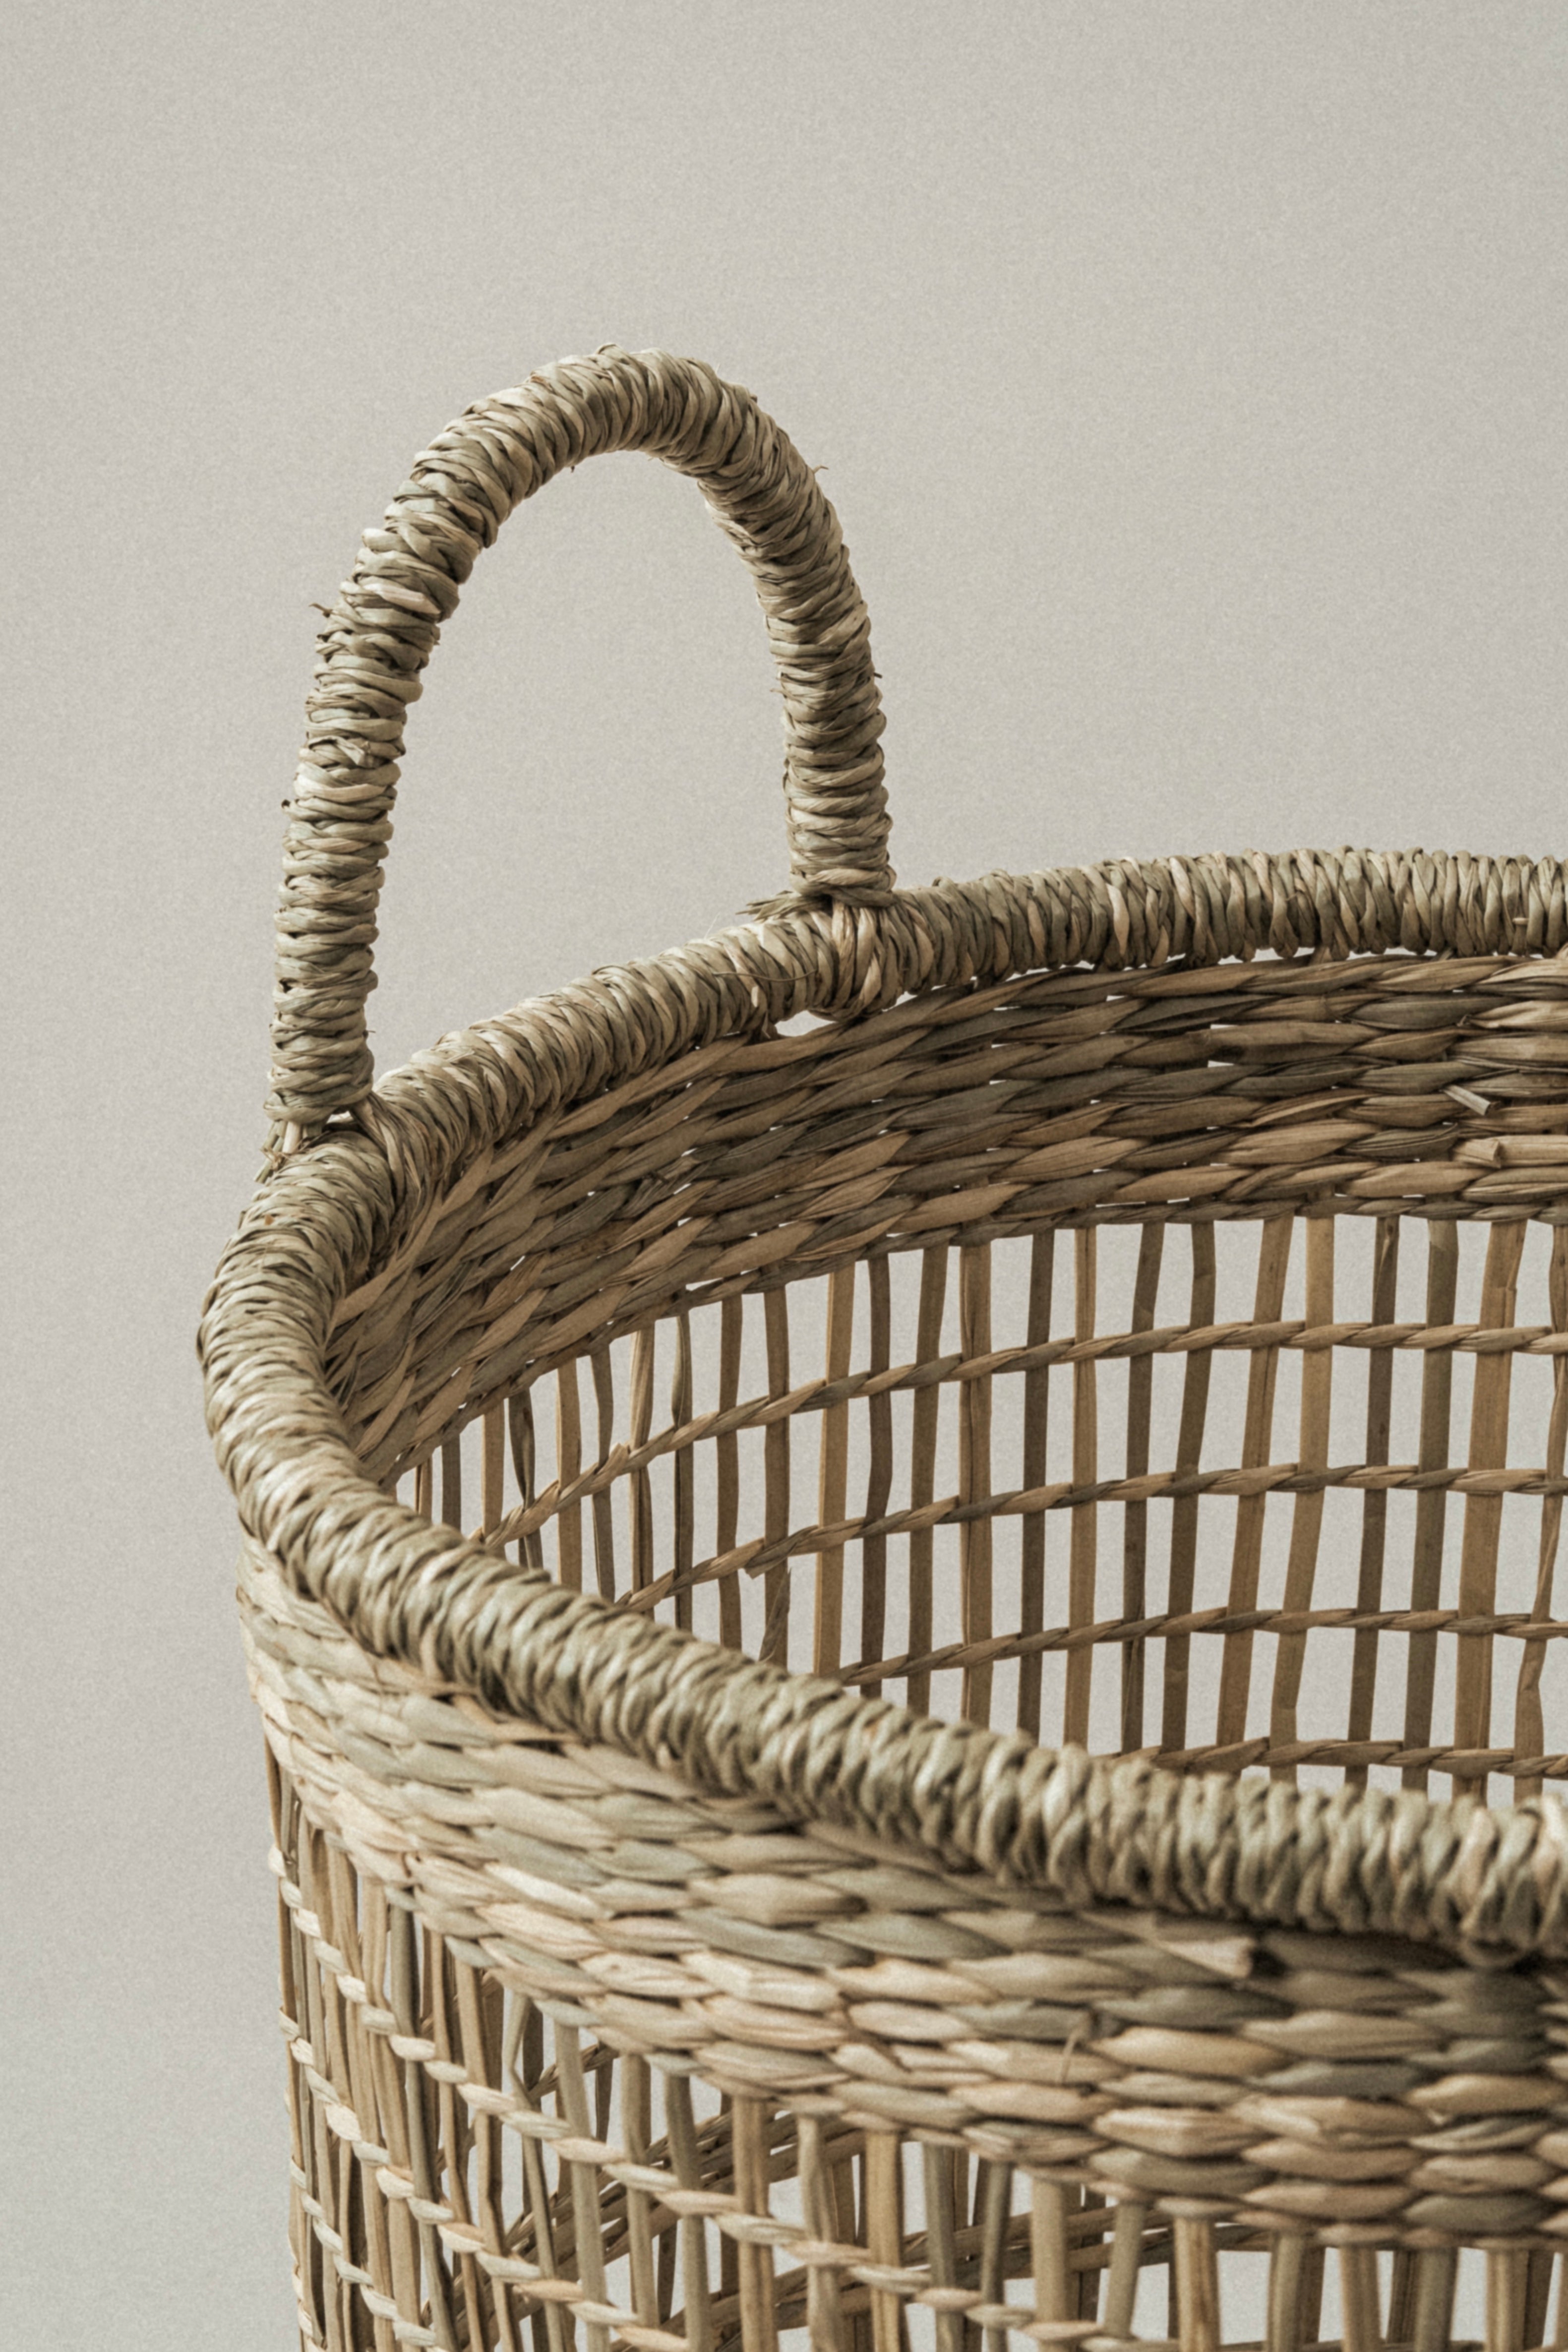 Small Salema Round Seagrass Basket with Handles - Small Salema Round Seagrass Basket with Handles